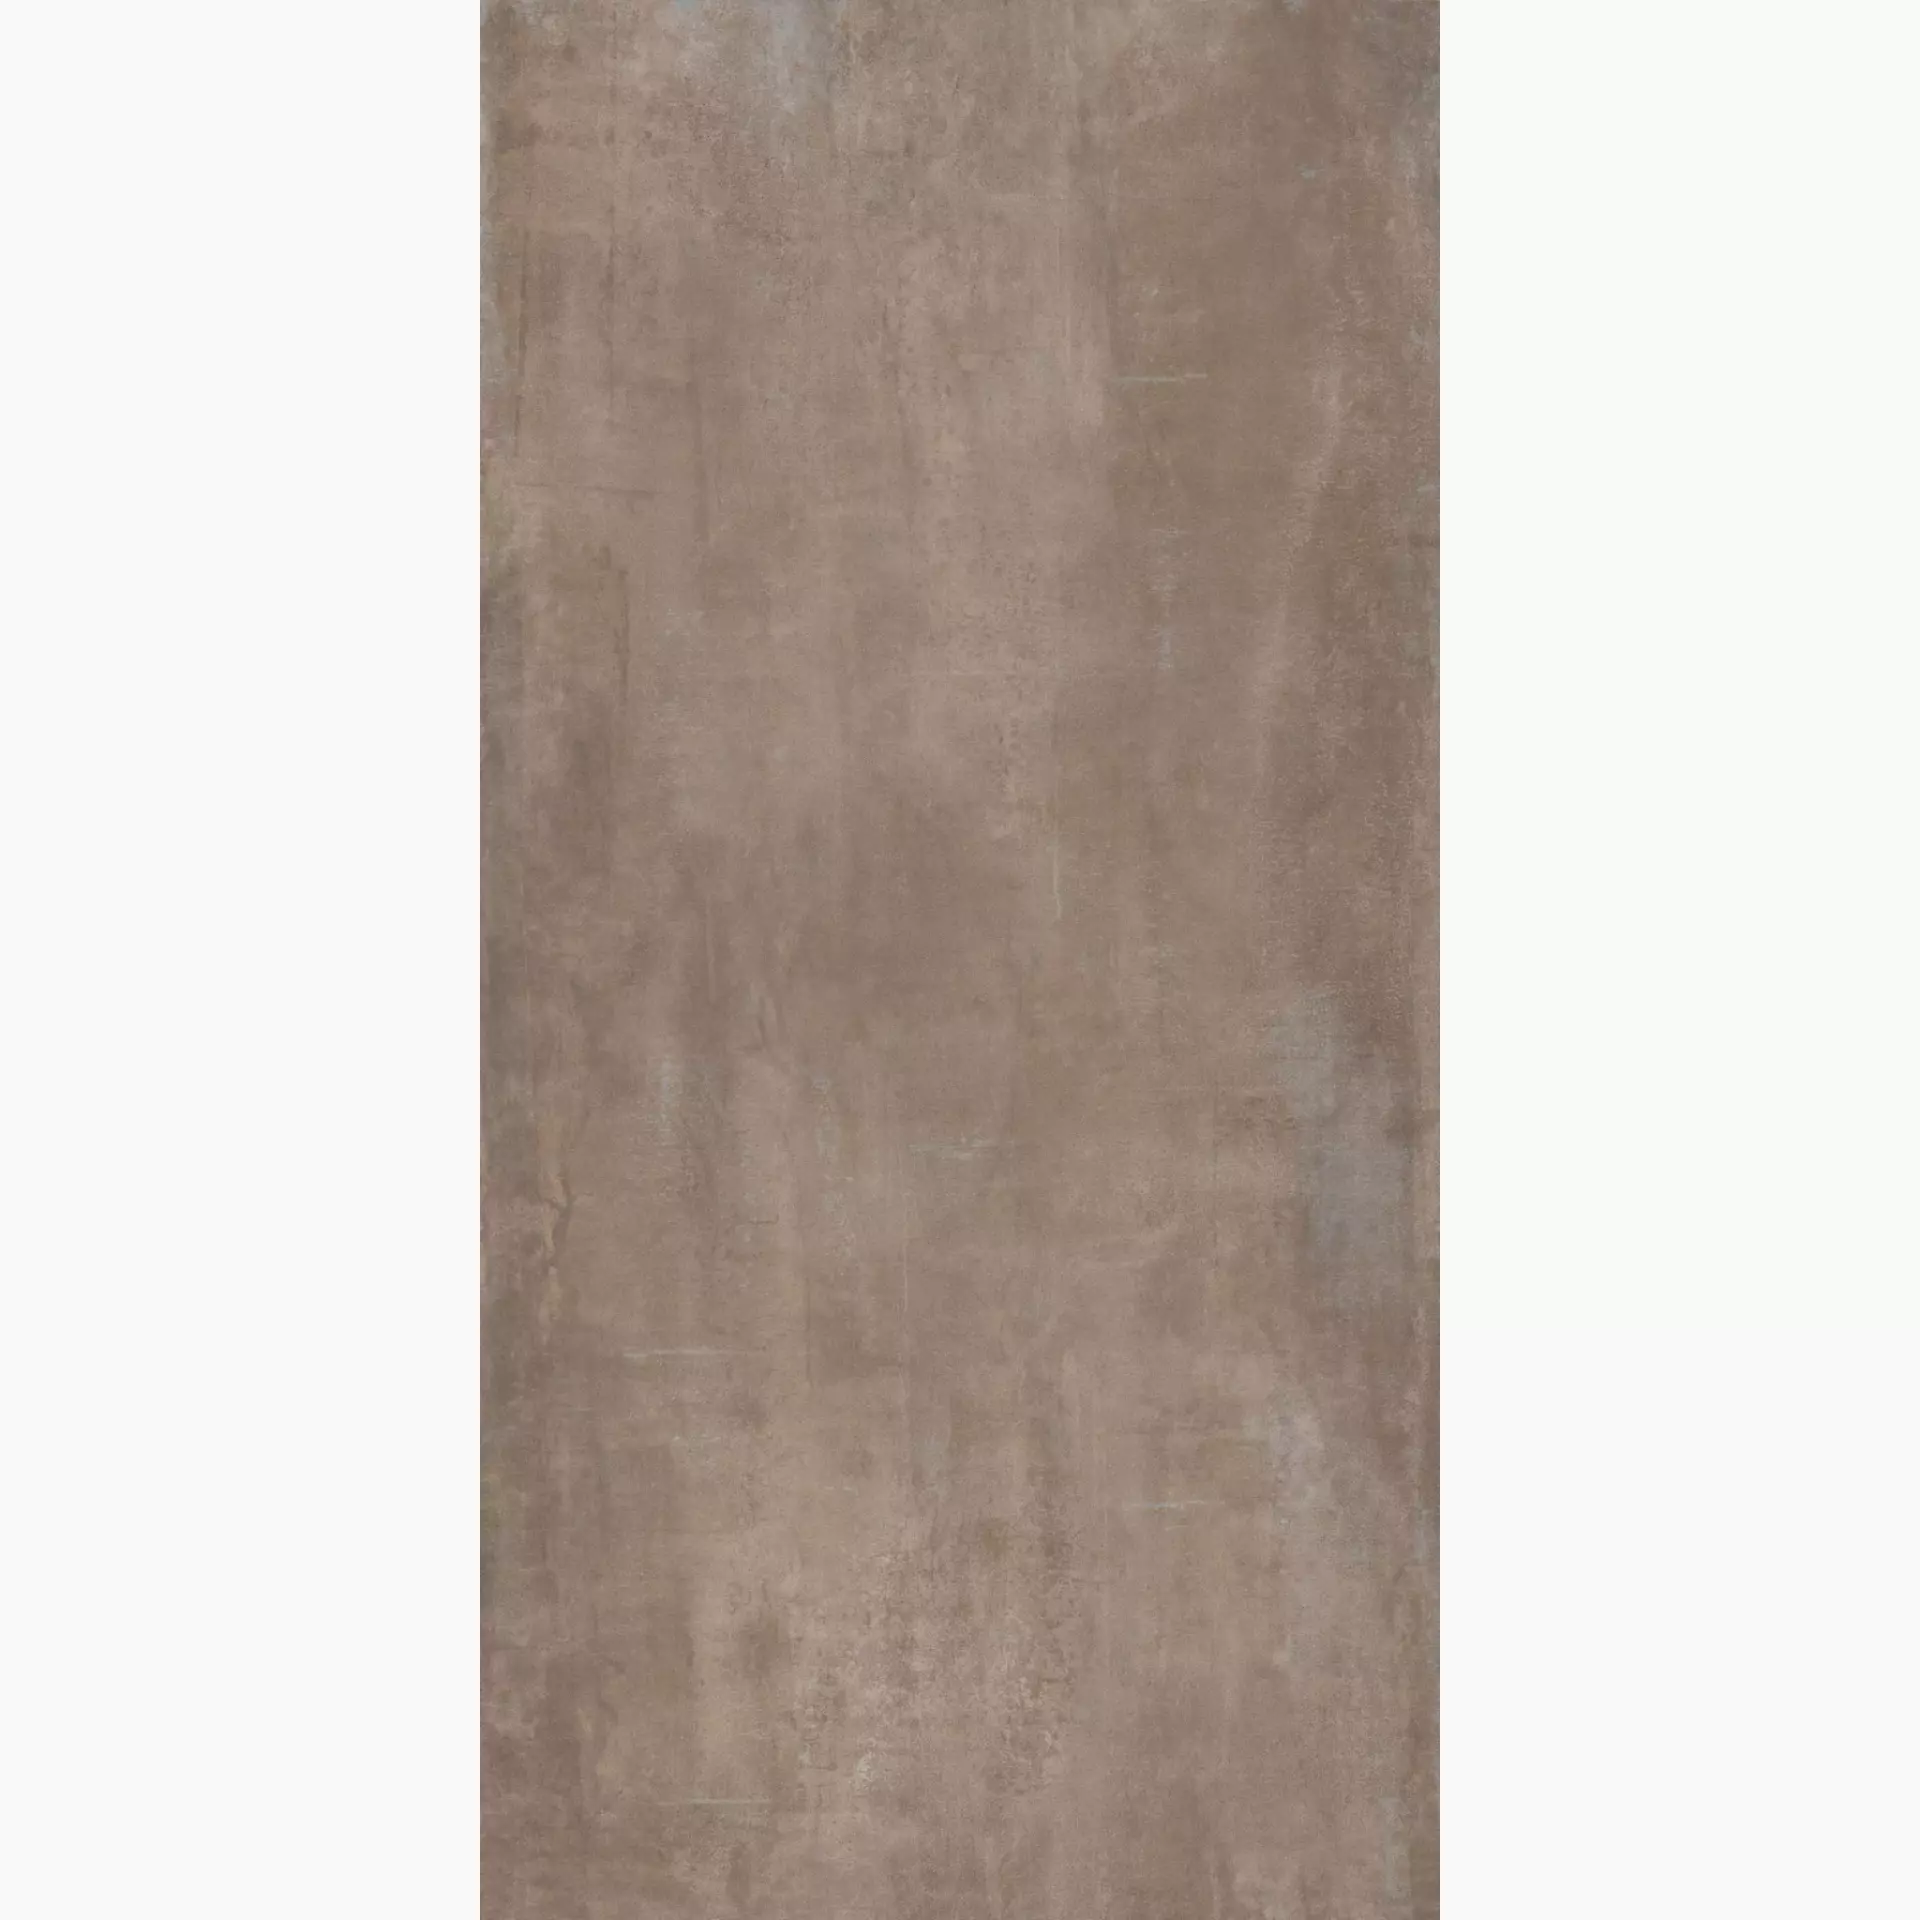 ABK Interno9 Mud Naturale I9R34250 60x120cm rectified 8,5mm